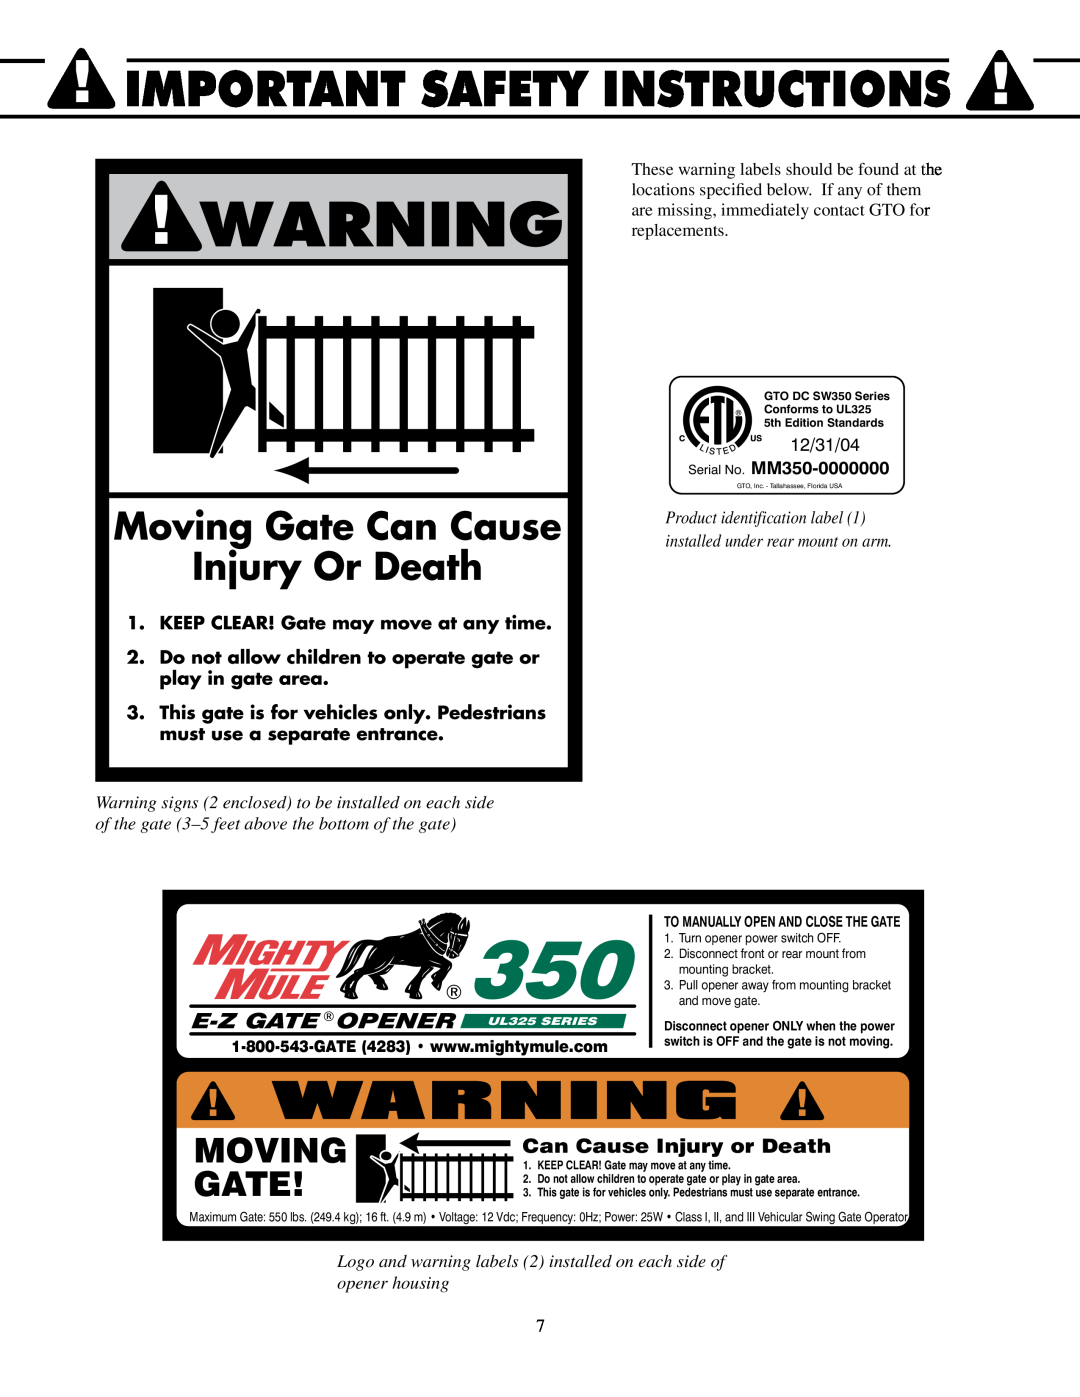 GTO Important Safety Instructions, Moving Gate, E-Z GATE OPENER UL325 SERIES, Can Cause Injury or Death, 12/31/04 